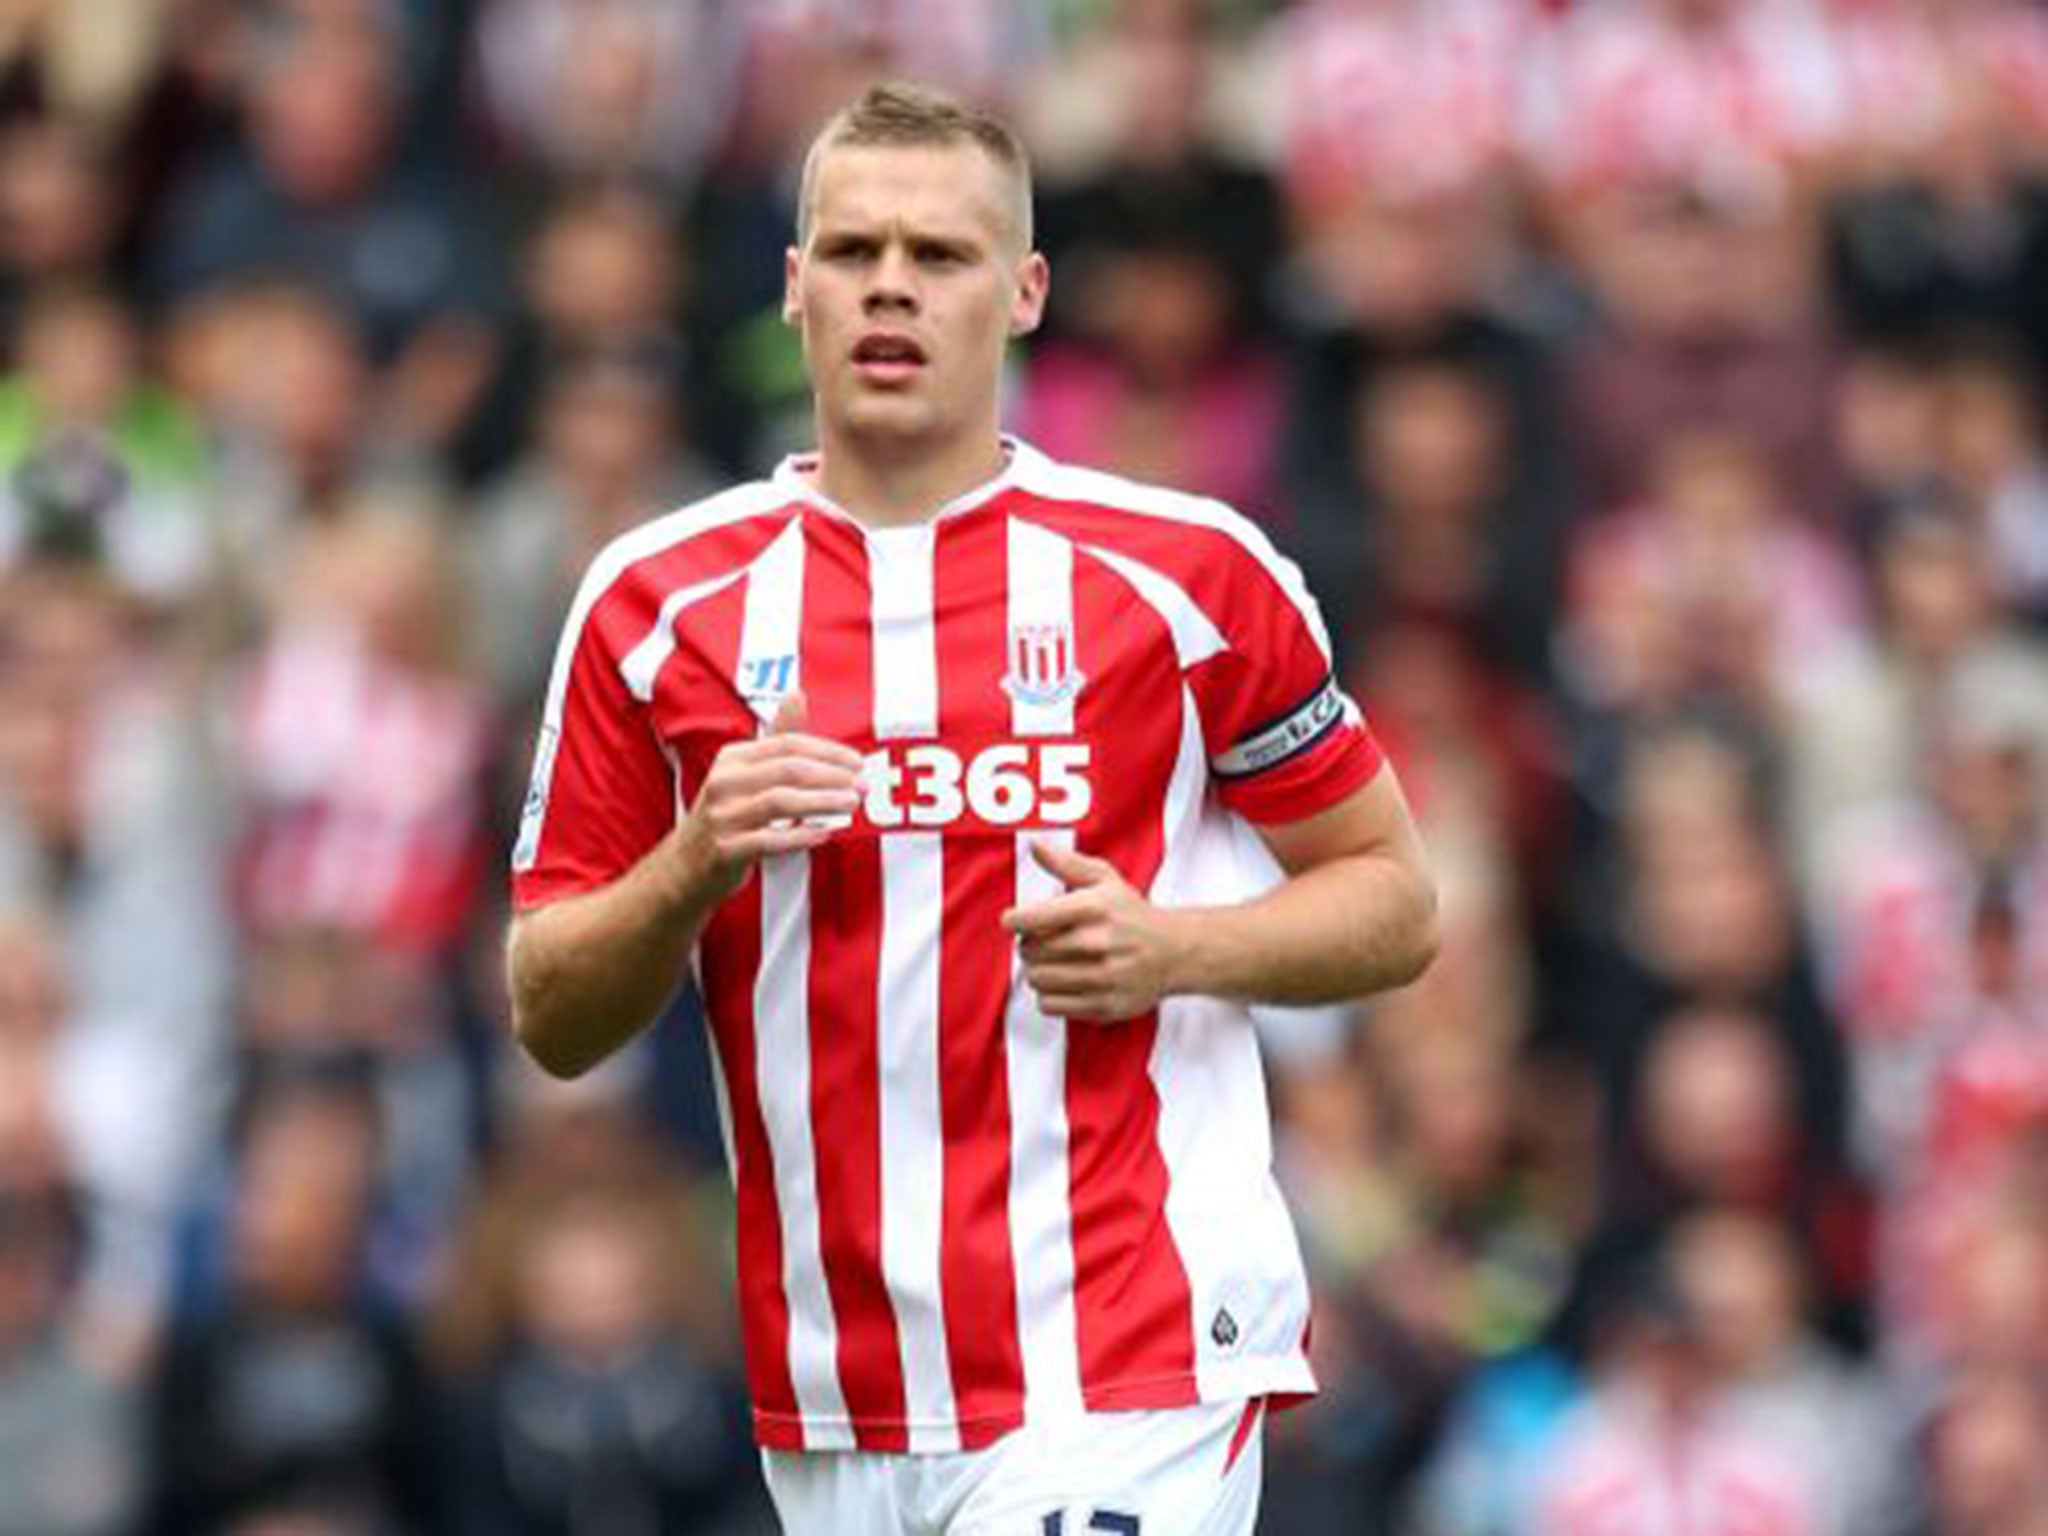 Ryan Shawcross has been linked with a move to Manchester United